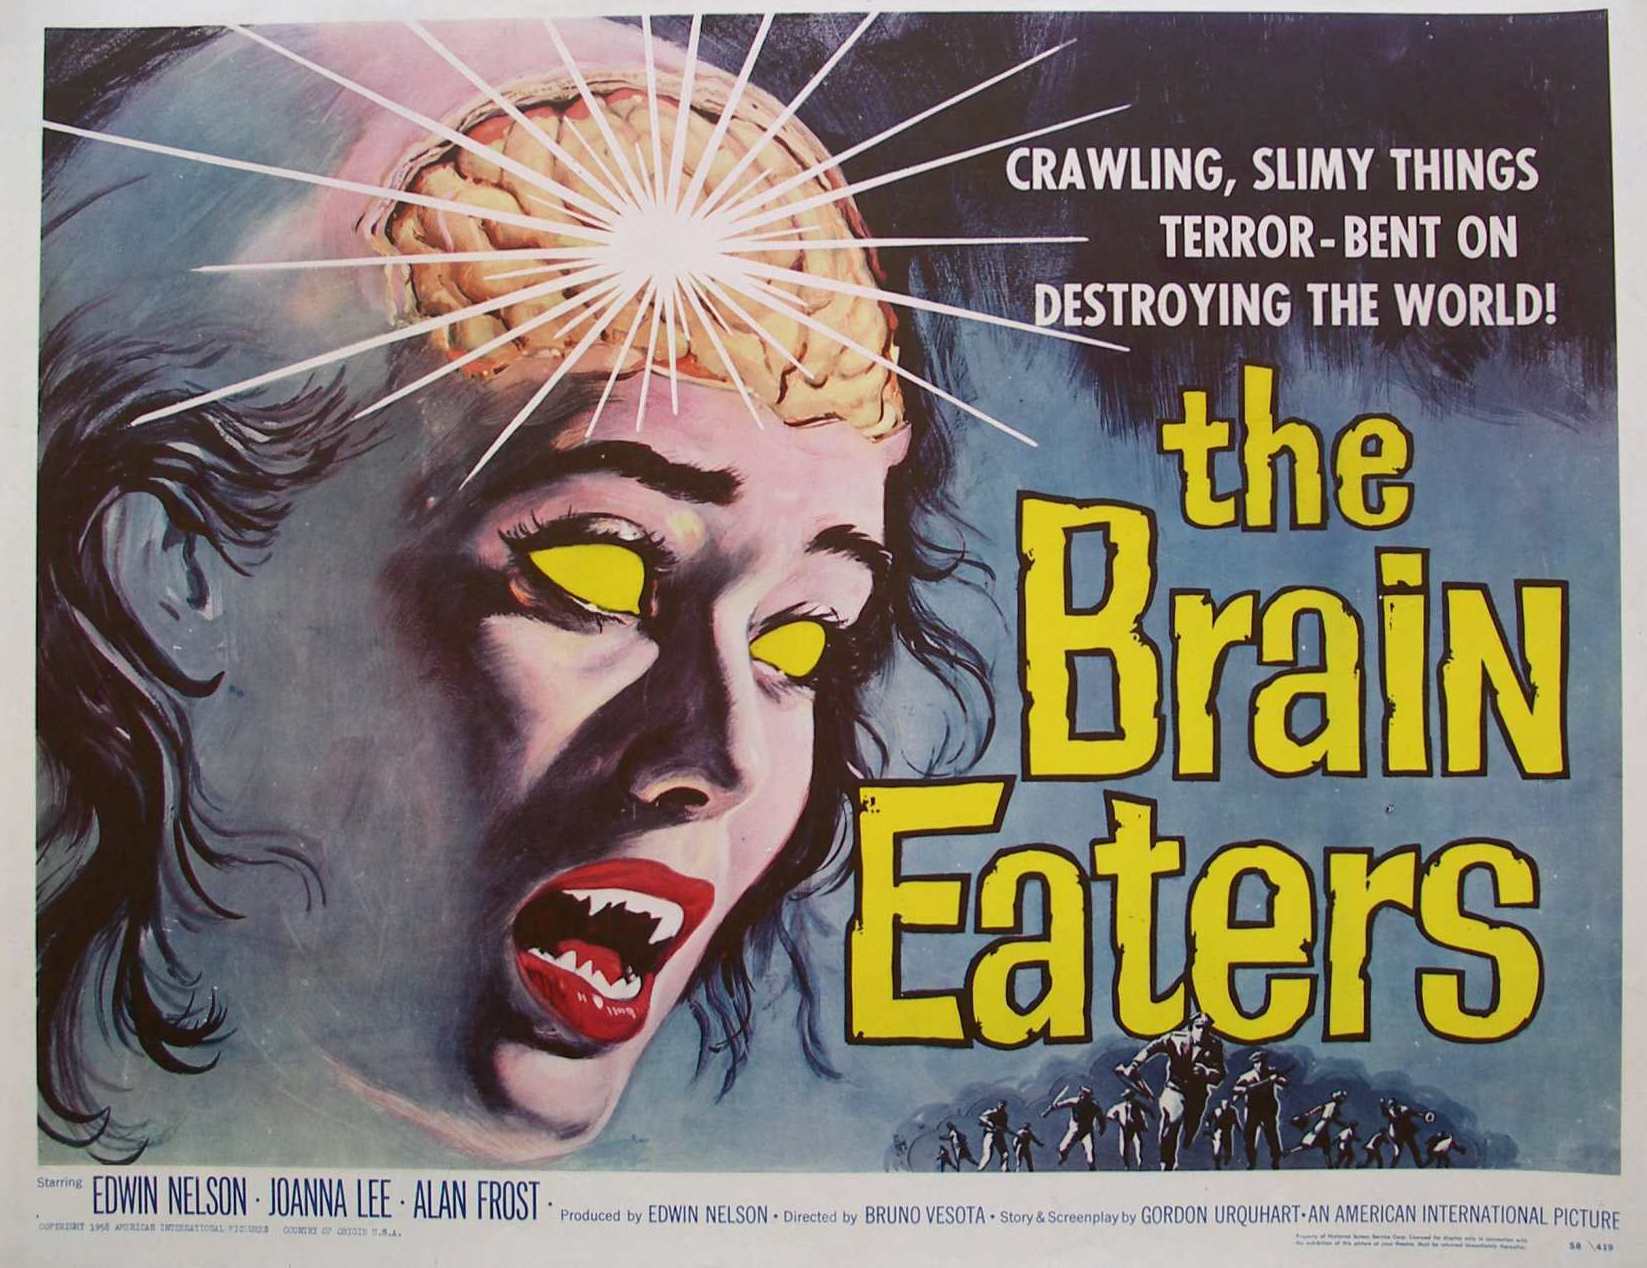 Old Retro Horror Film Posters - Brain Eaters